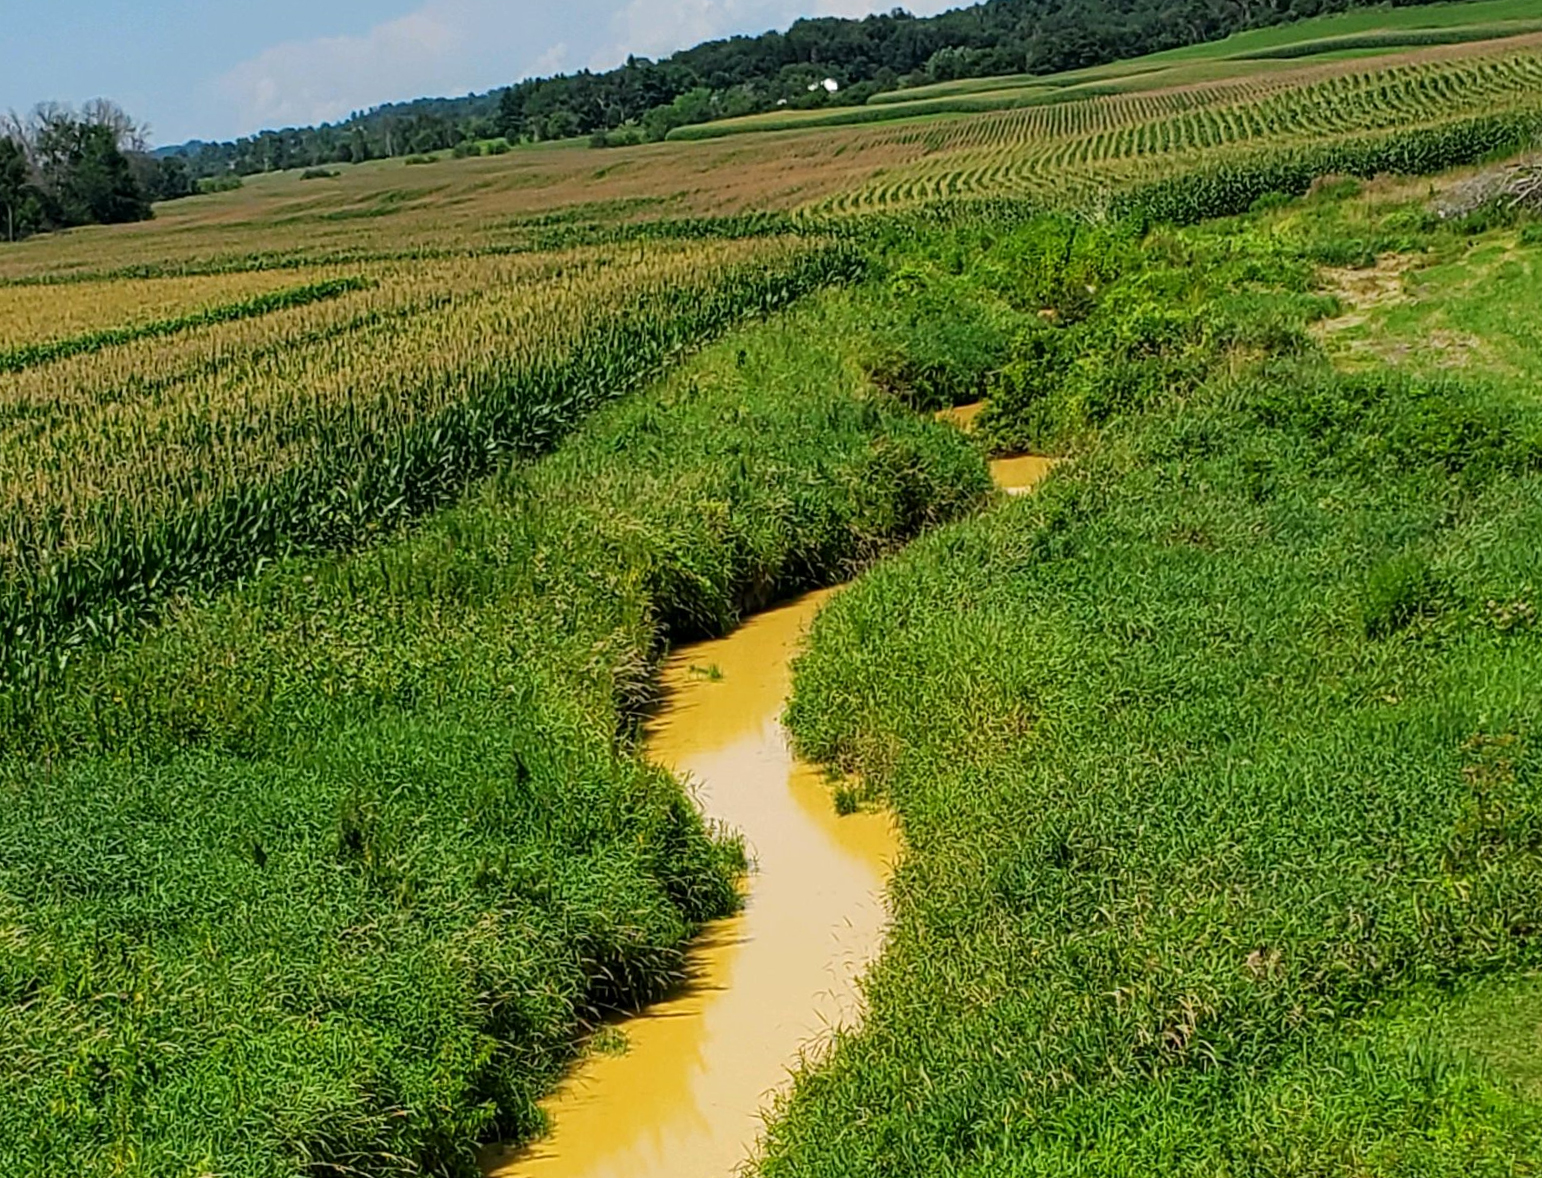 Curran Coulee Creek after a frac sand mine spill